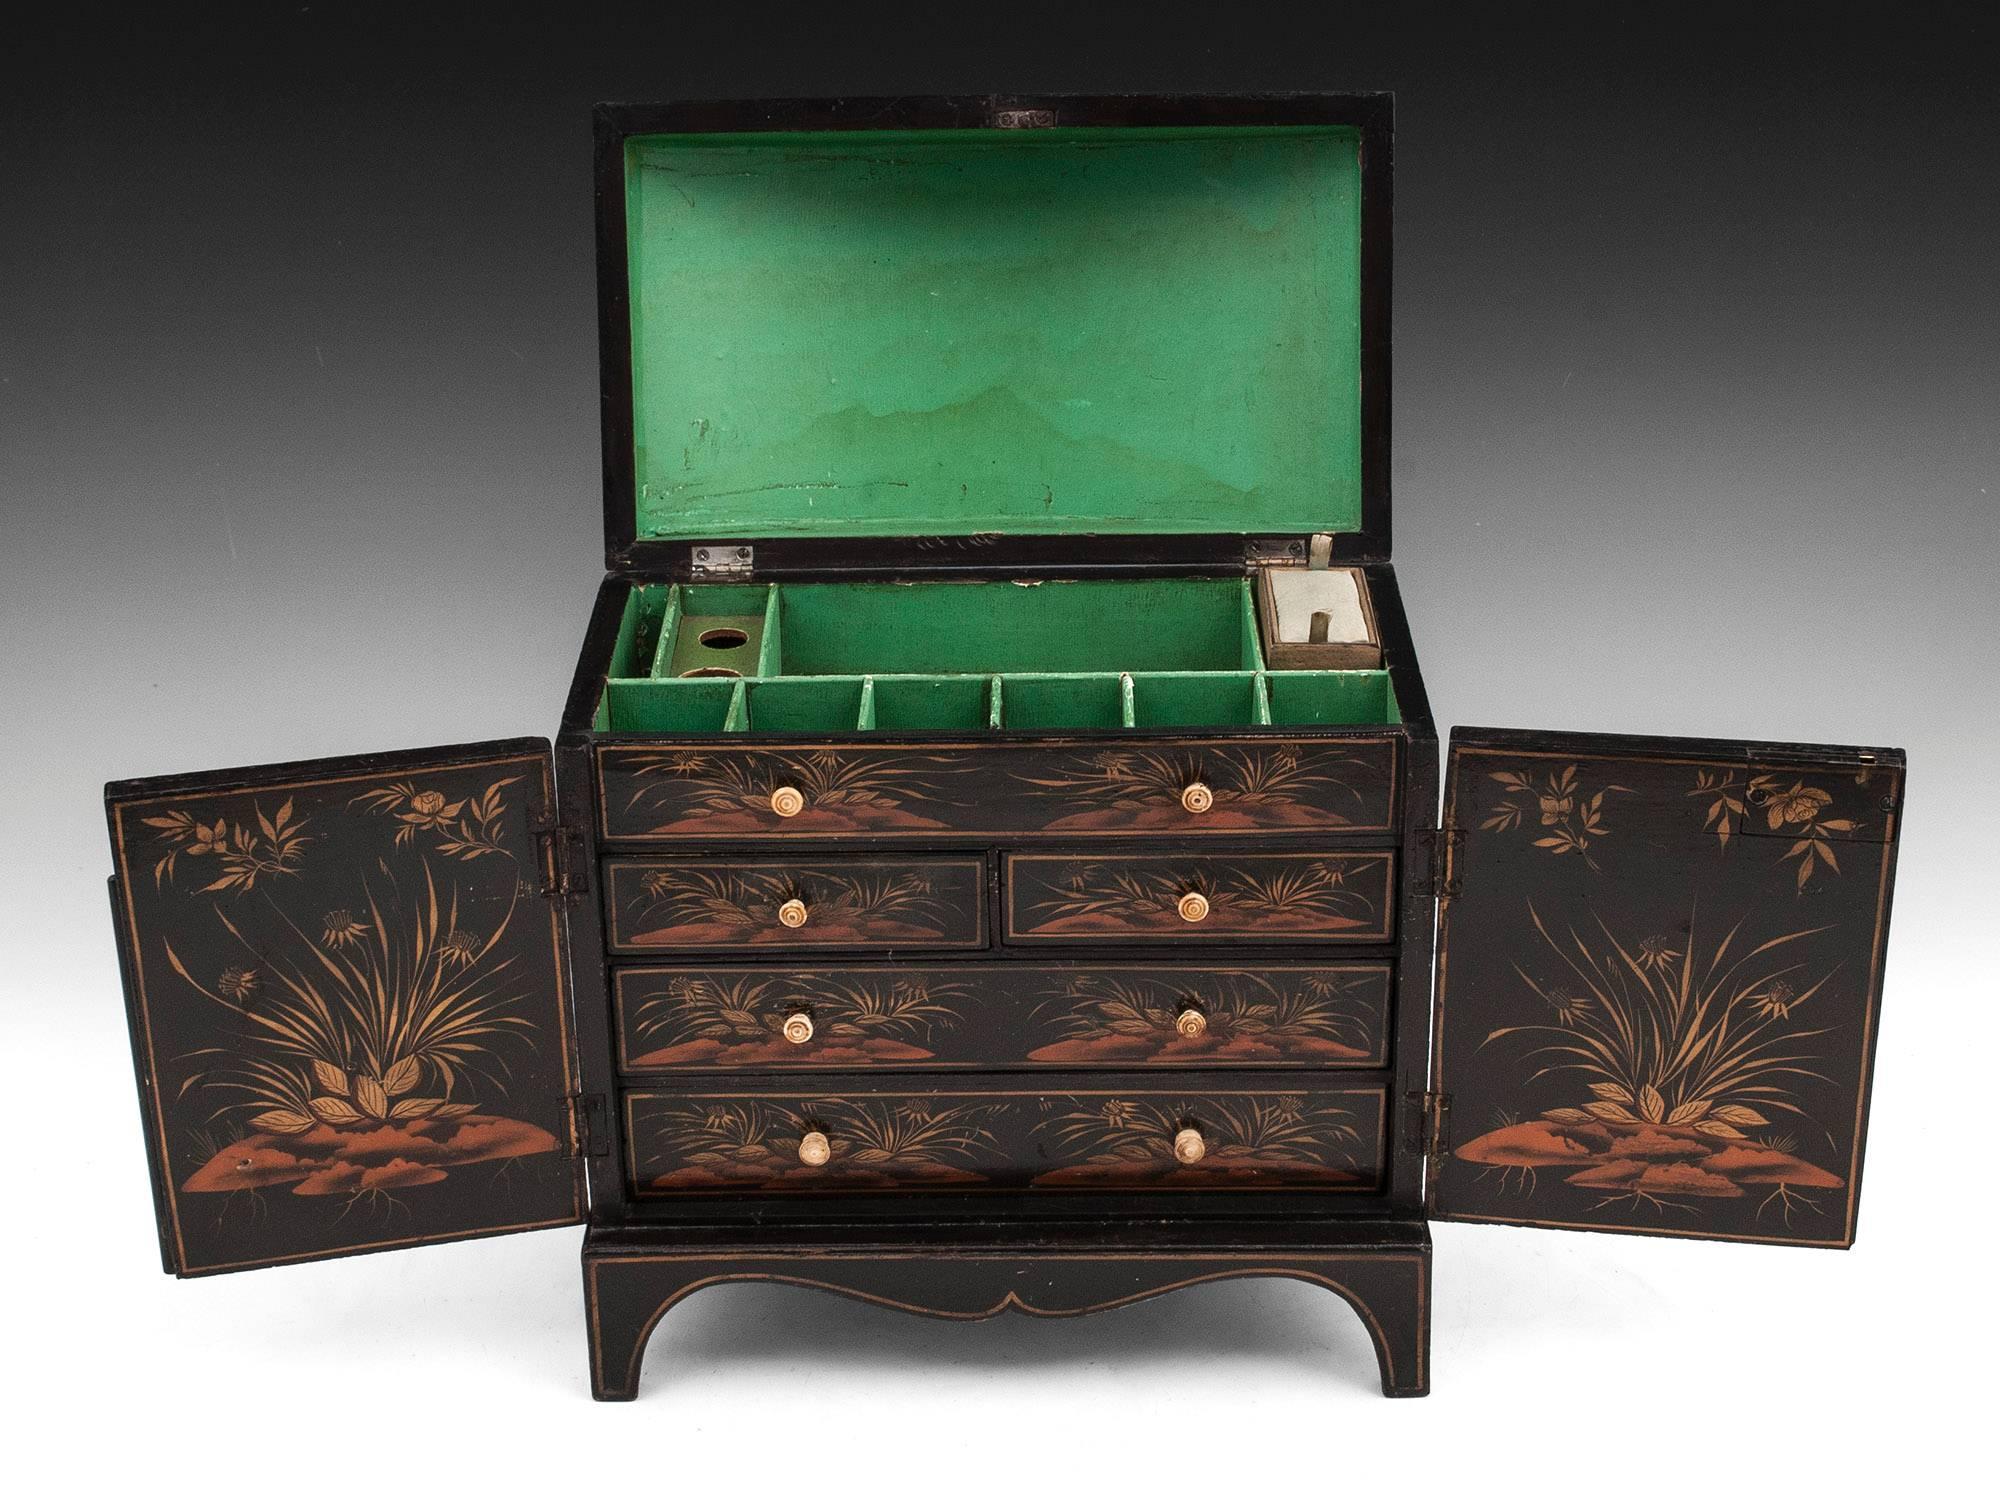 Antique 19th Century Japanned Chinoiserie Sewing Cabinet In Excellent Condition For Sale In Northampton, United Kingdom